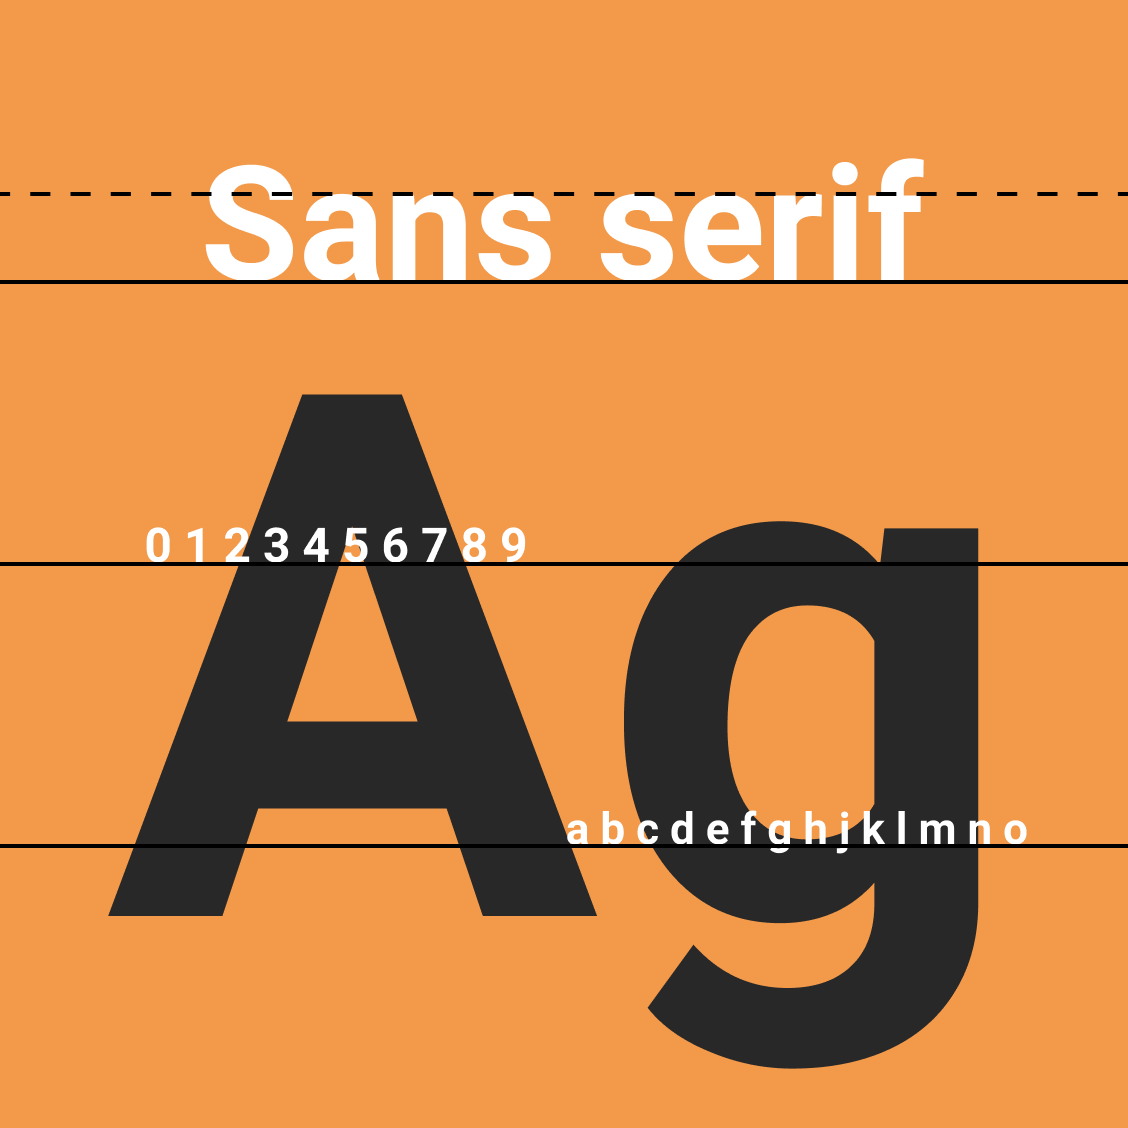 Which Sans Is This?